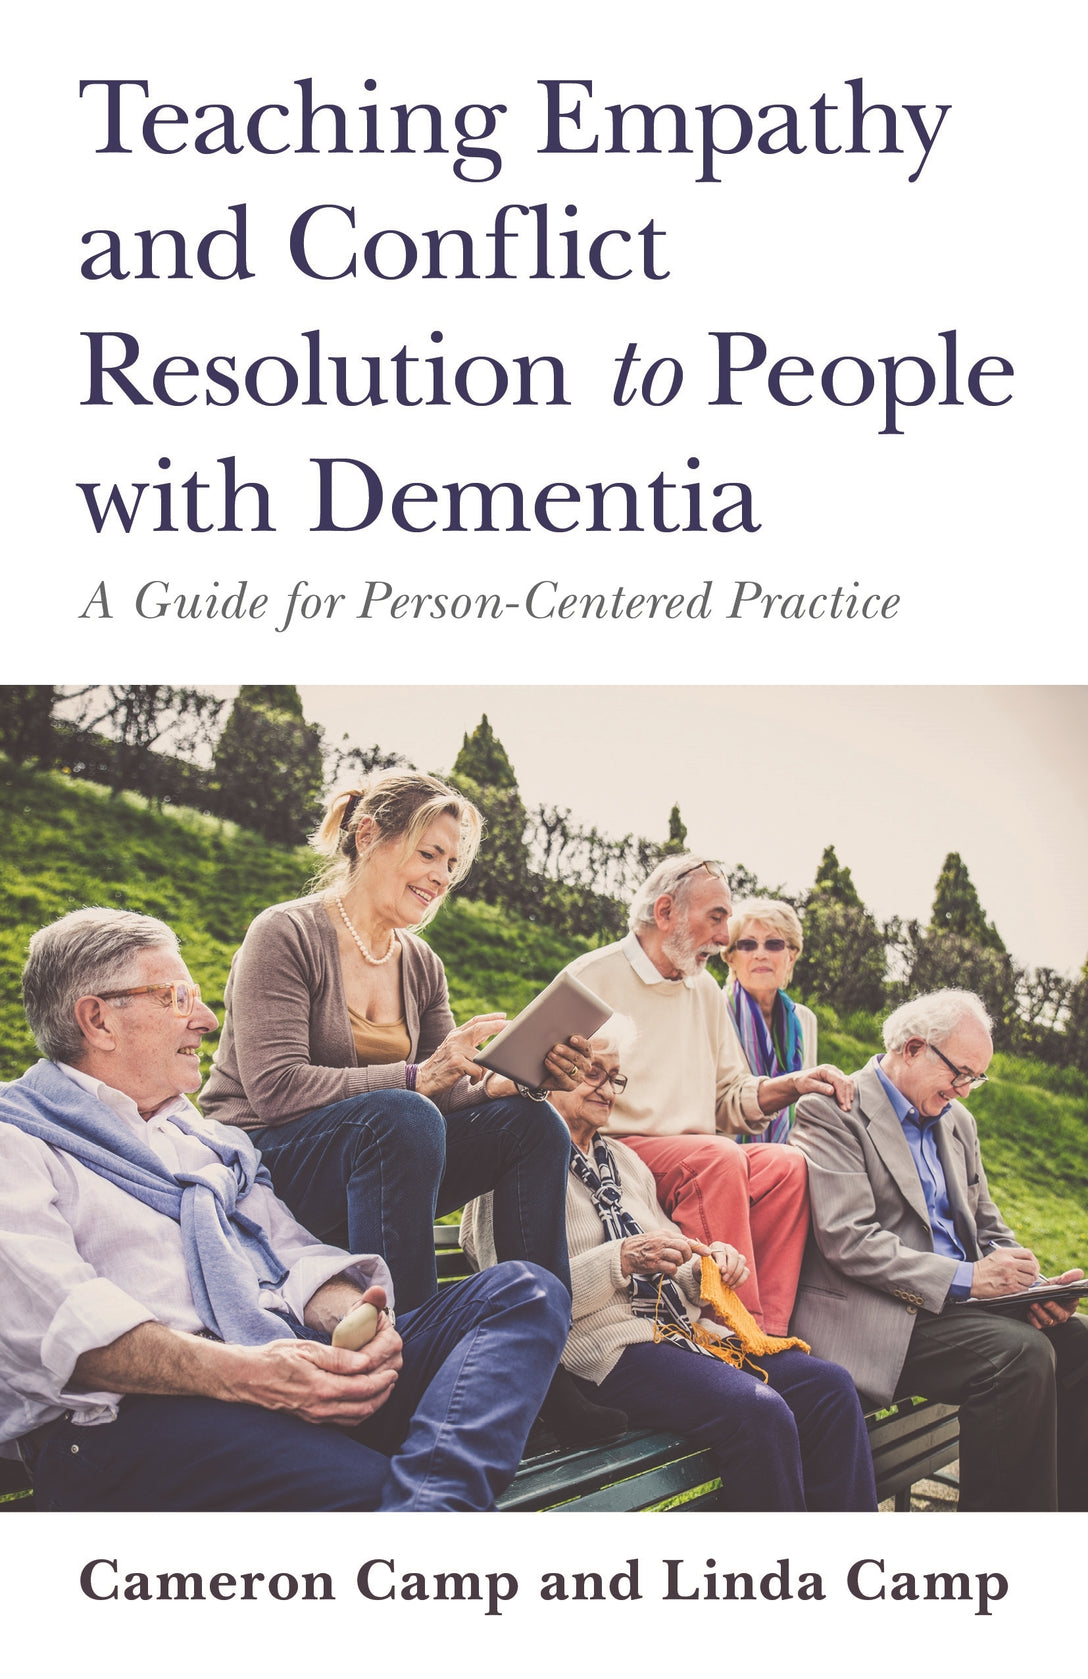 Teaching Empathy and Conflict Resolution to People with Dementia by Cameron Camp, Linda Camp